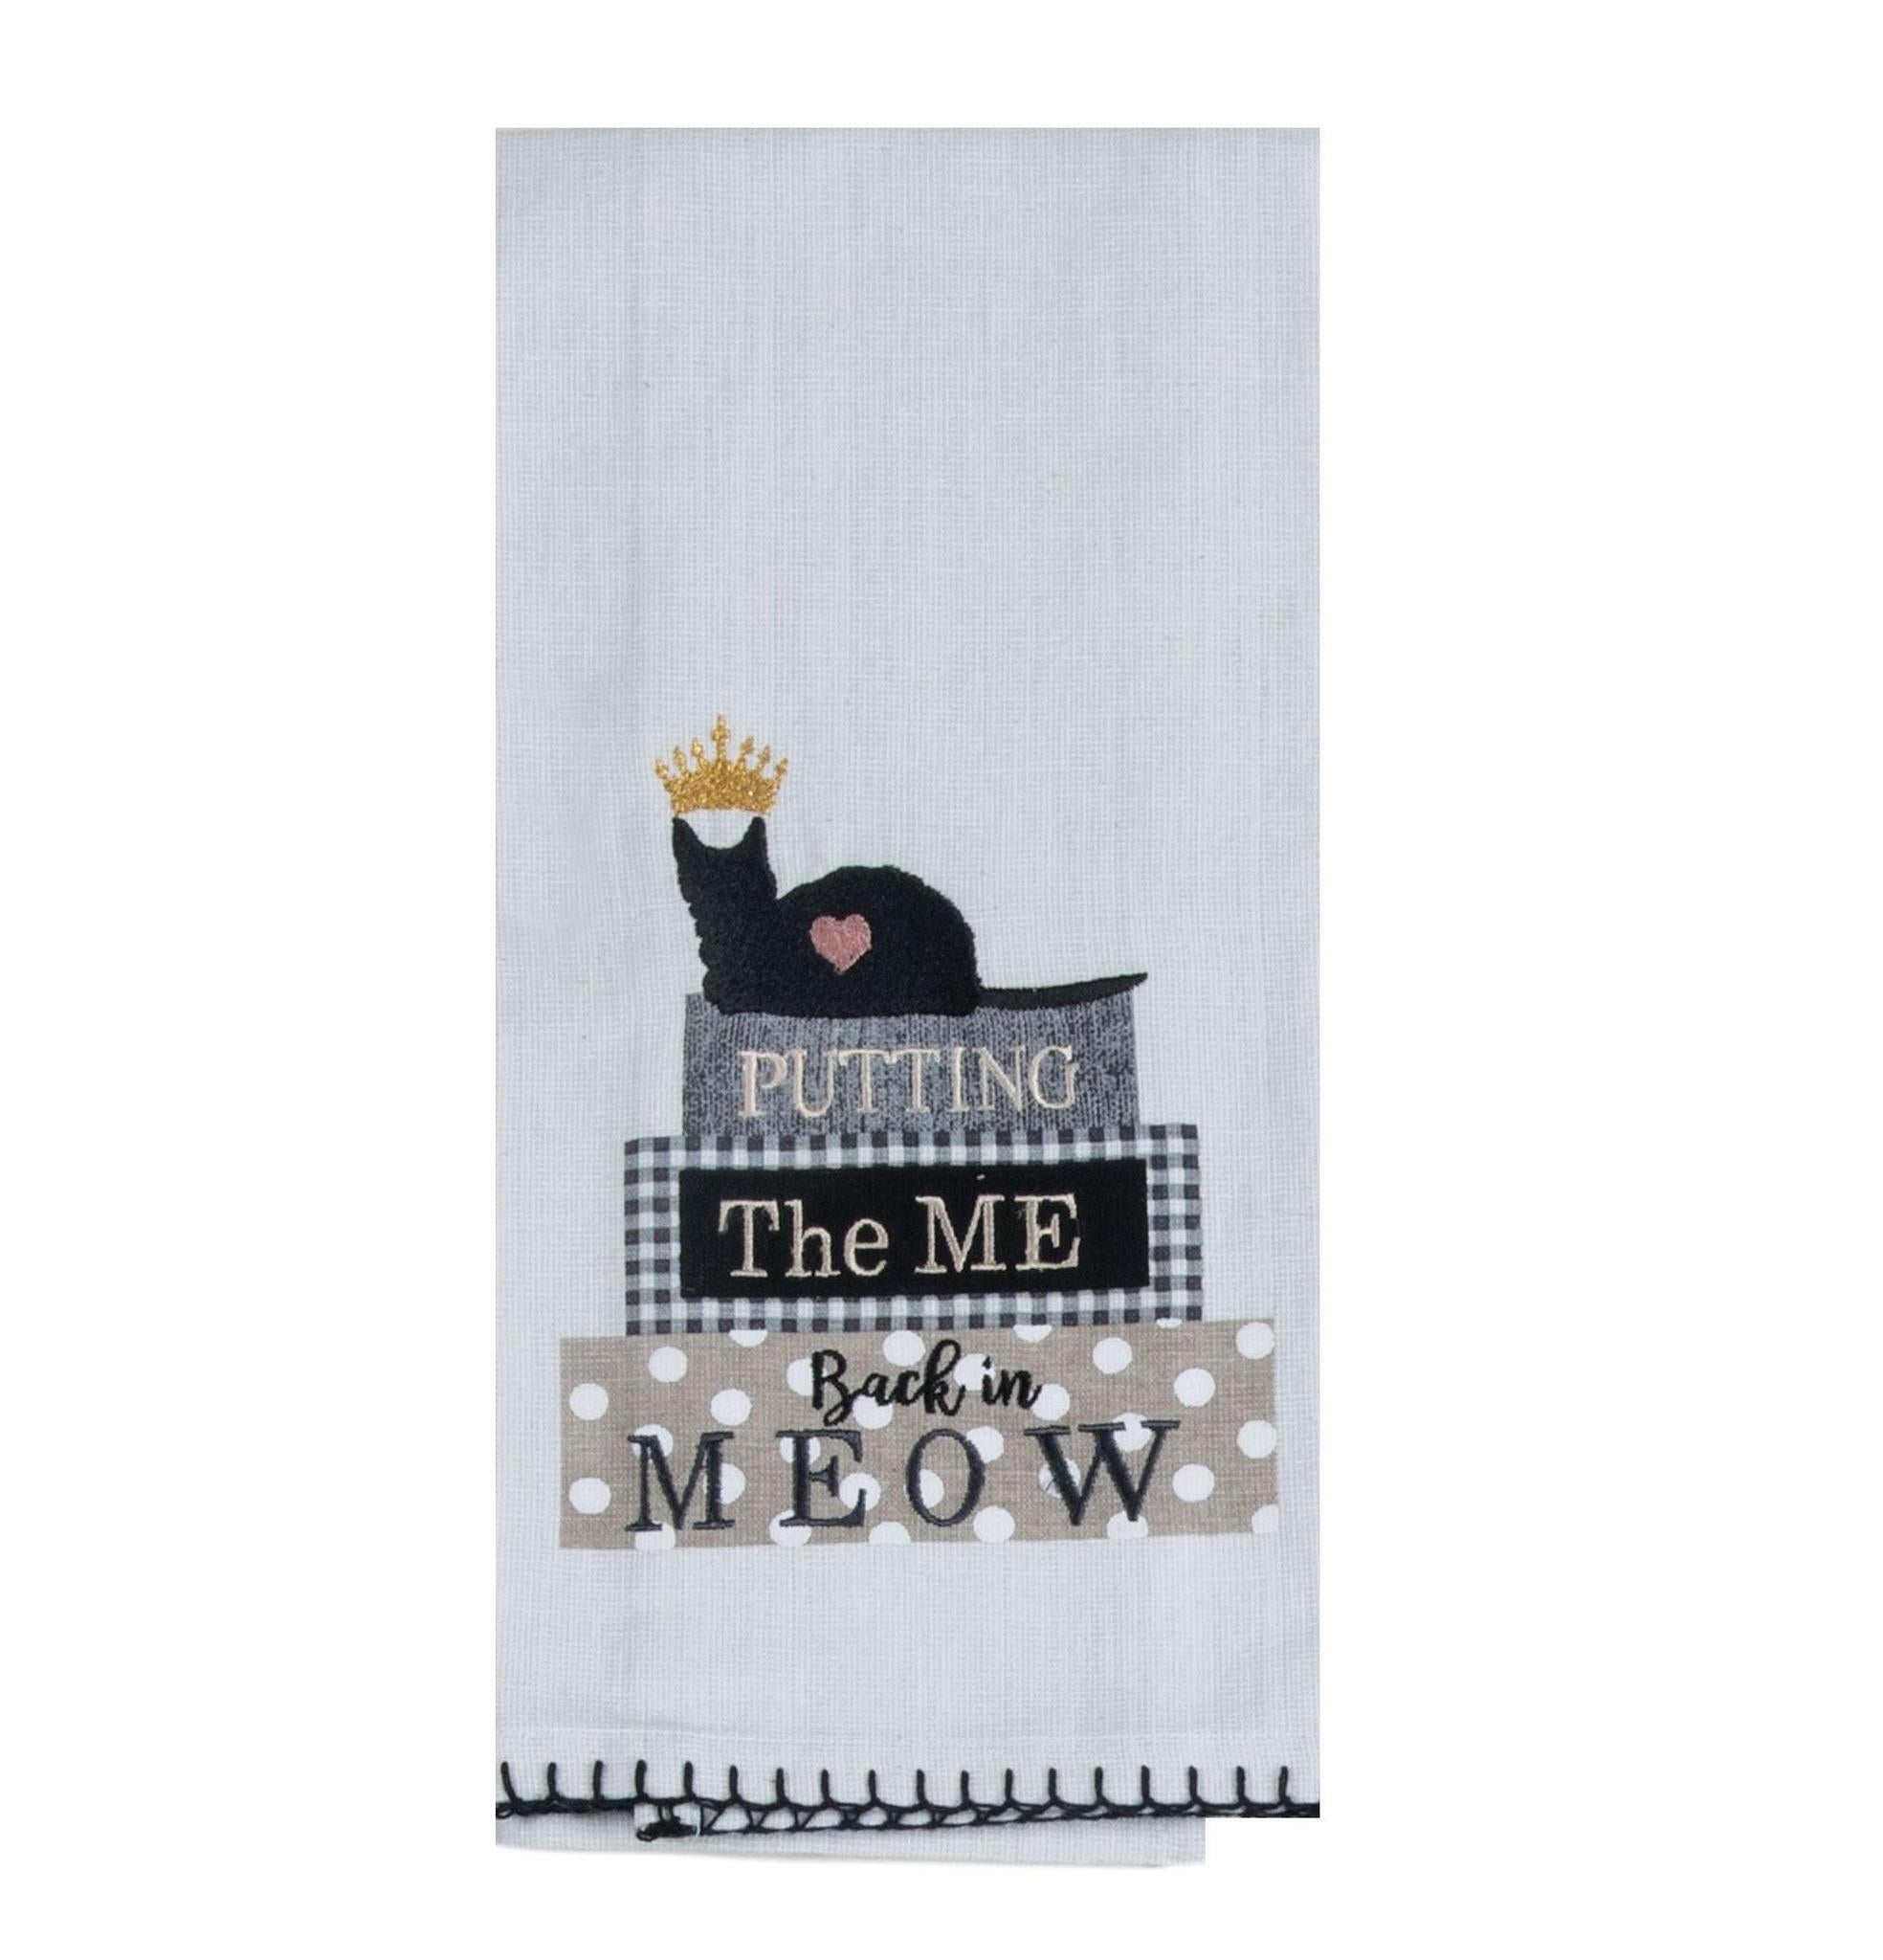 Embroidered Tea Towel "Putting the Me in Meow"